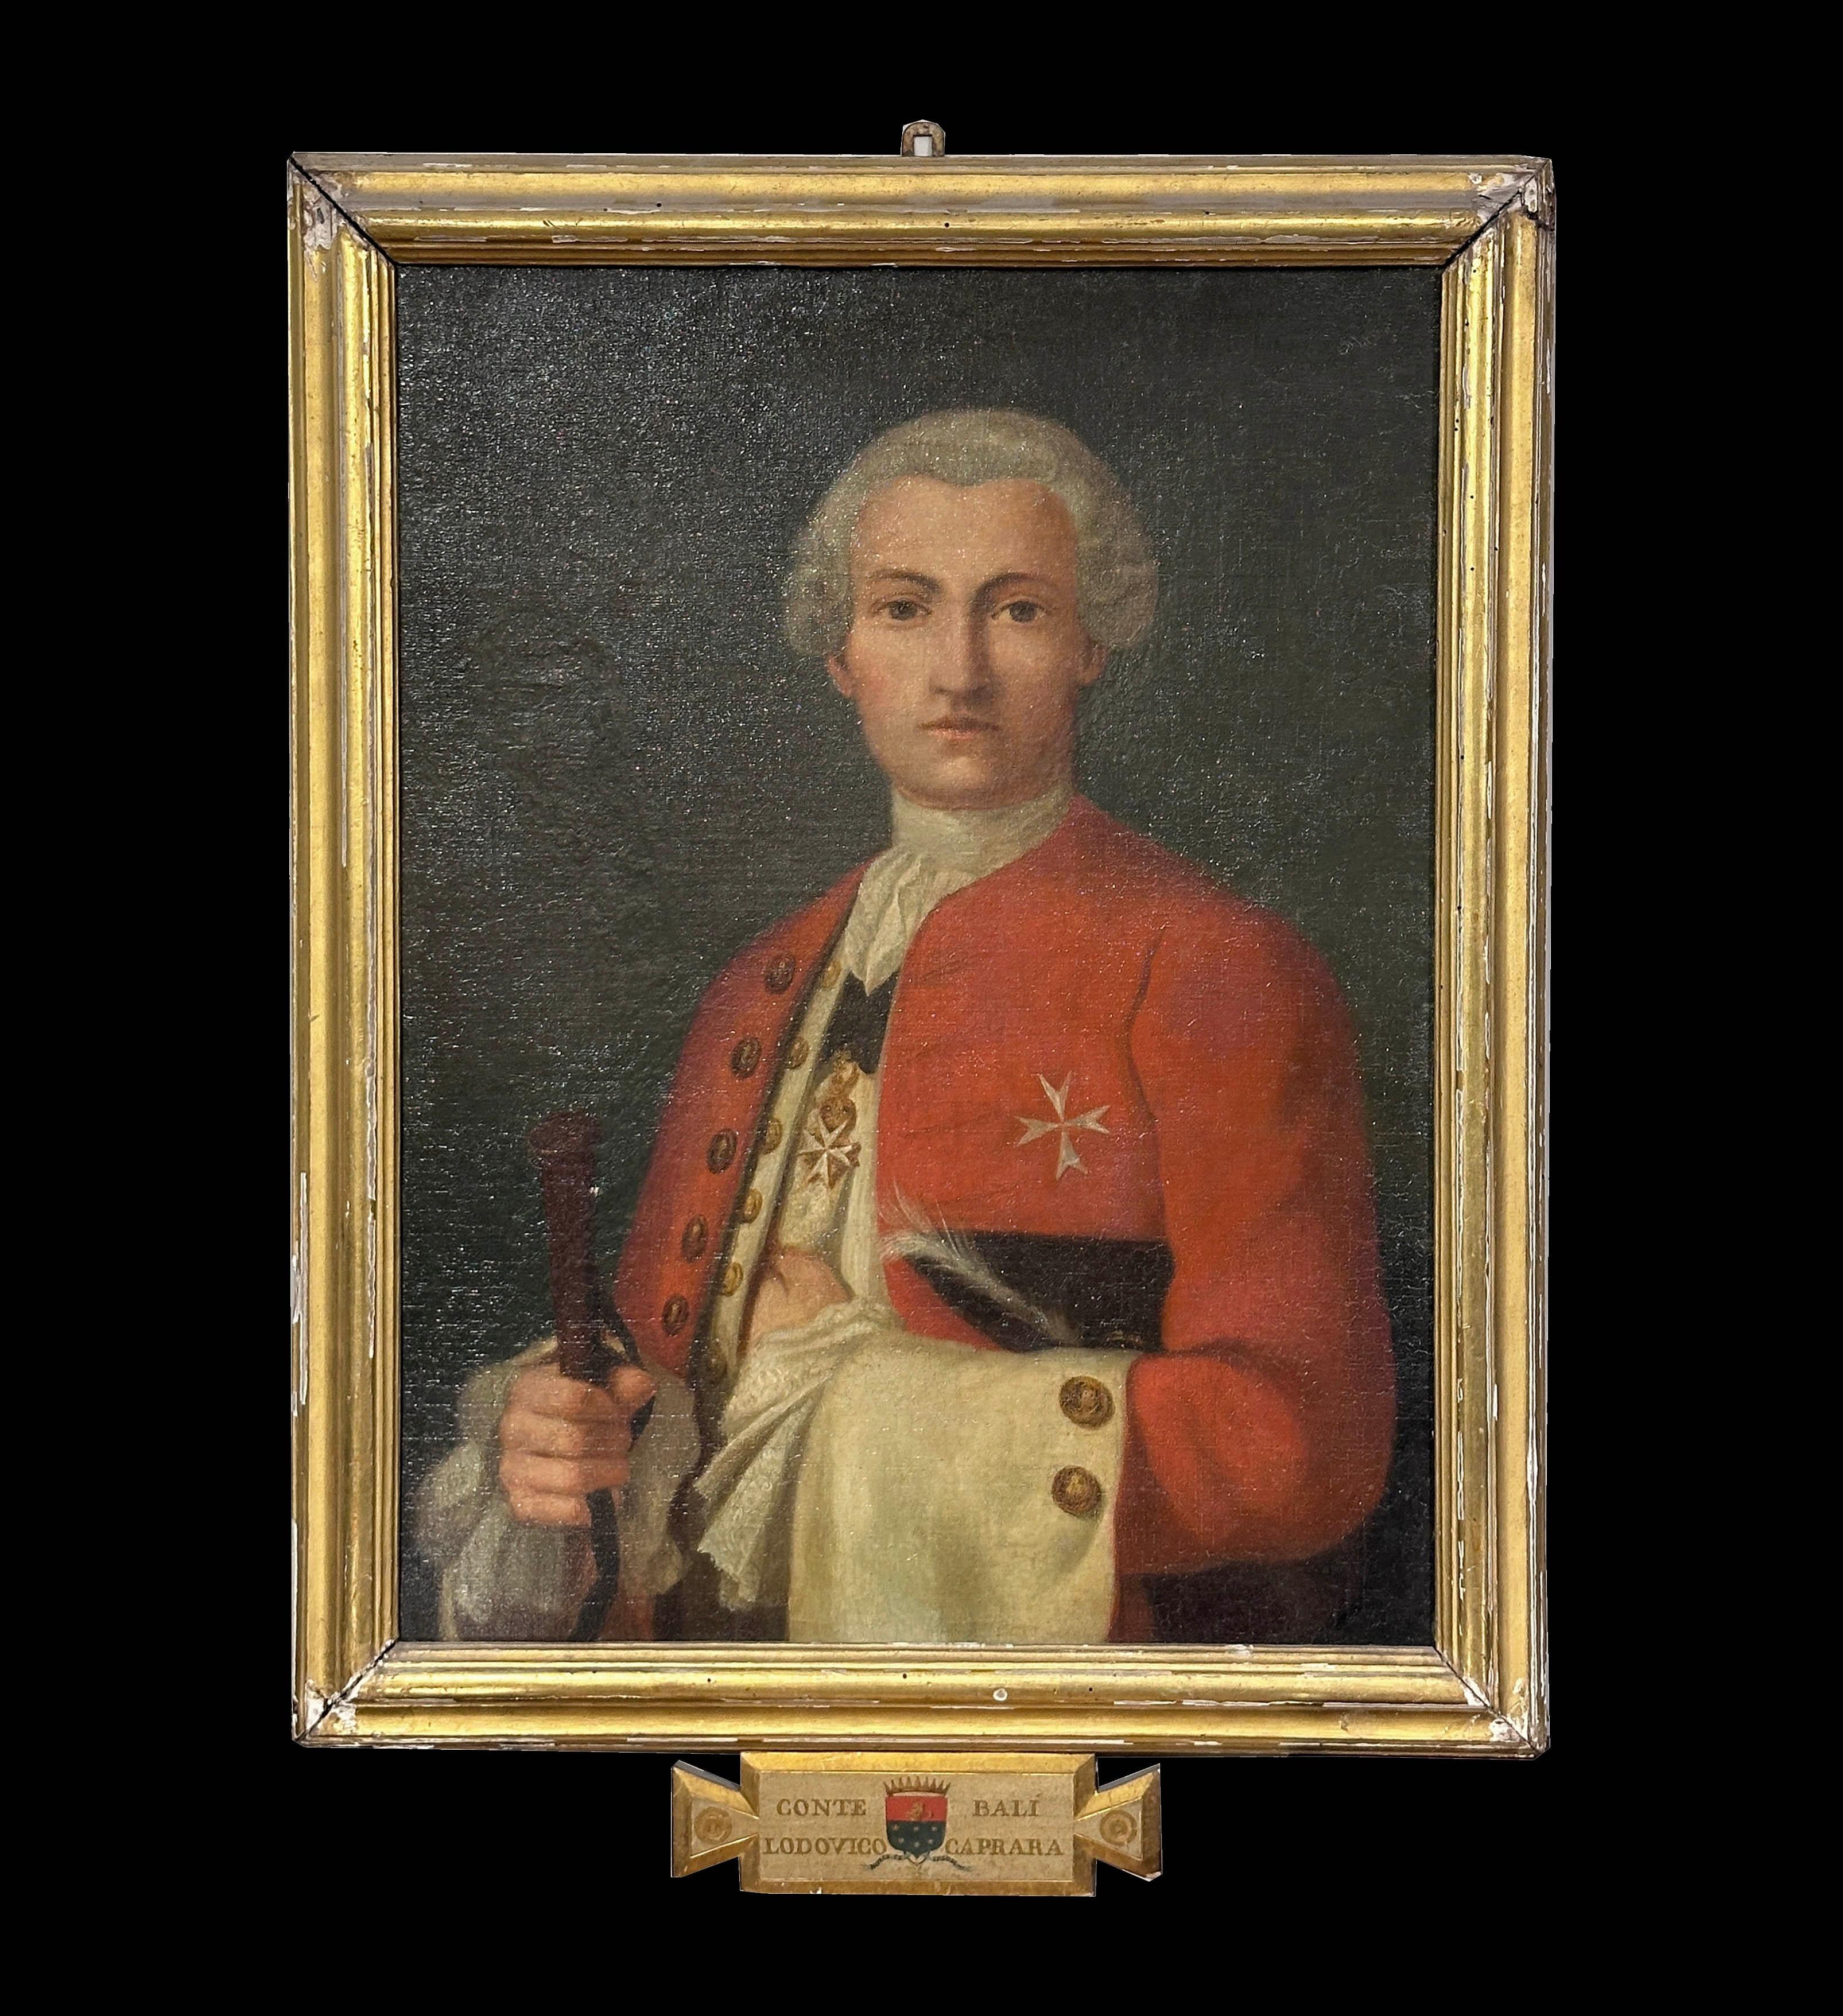 Splendid oil portrait on canvas of Count Bailiff Ludovico Caprara (1731-1812), as indicated by the writing inside the 